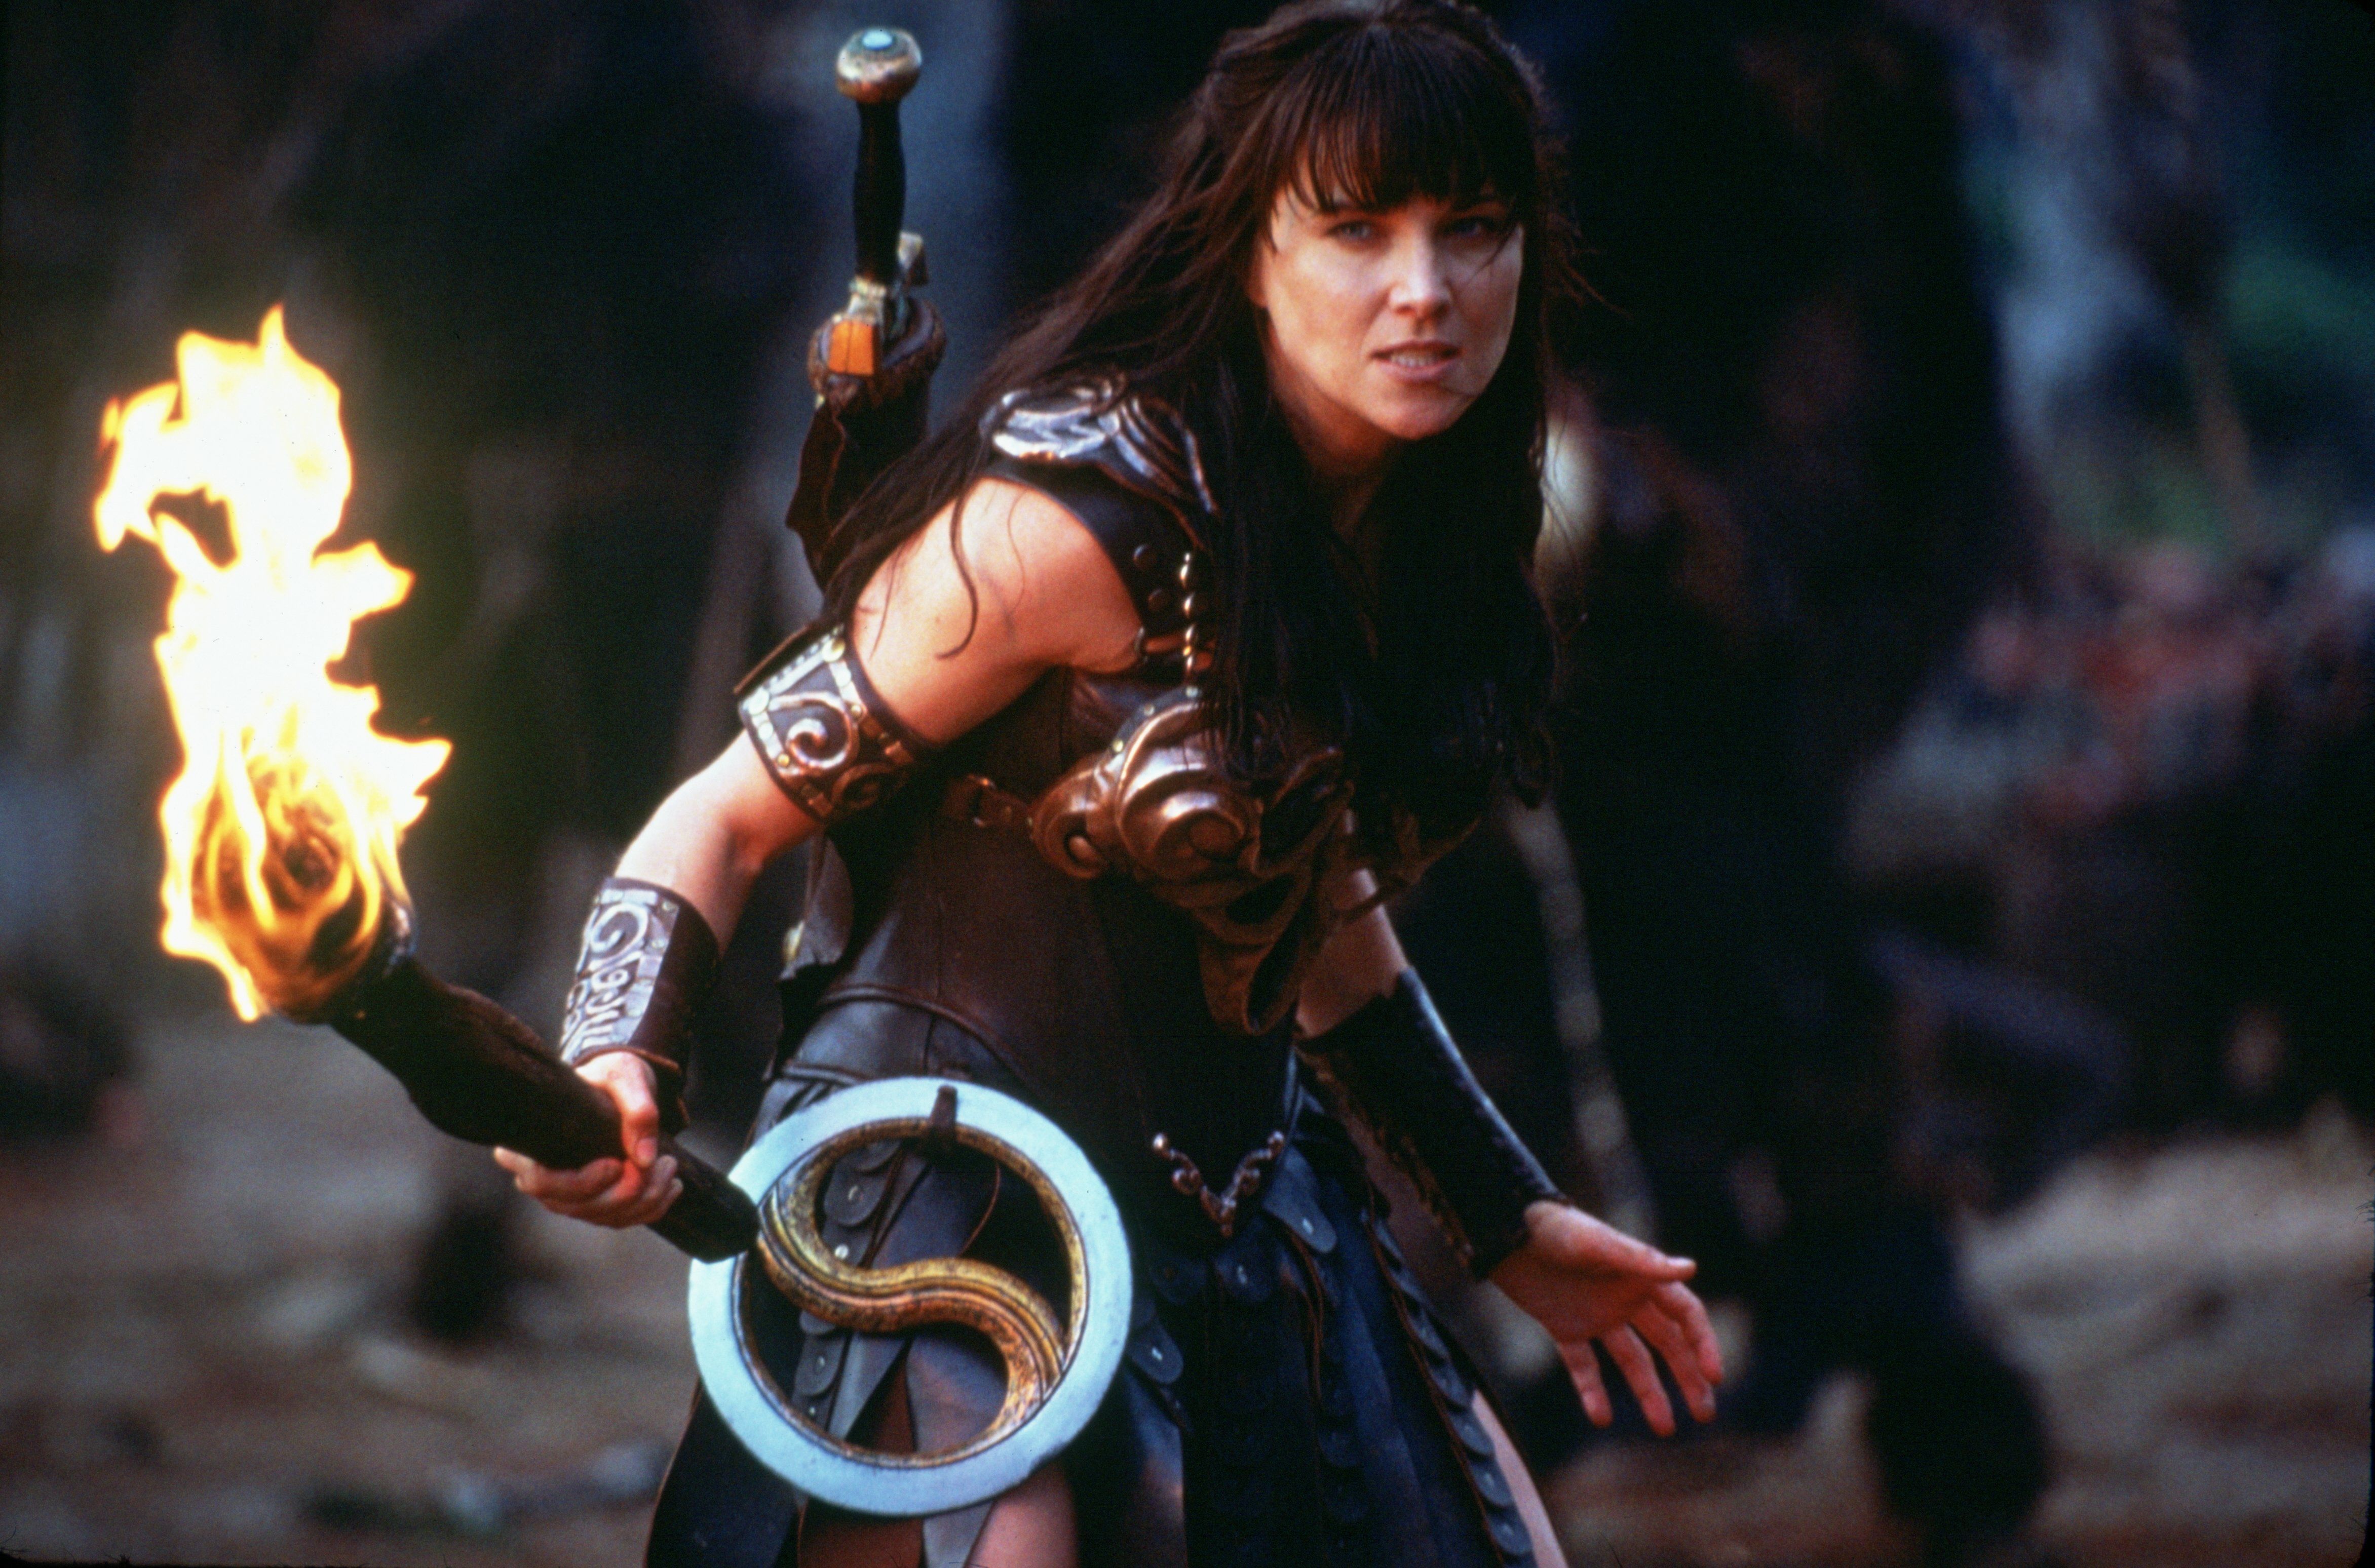 Lucy Lawless wants to bring back Xena: Warrior Princess on TV